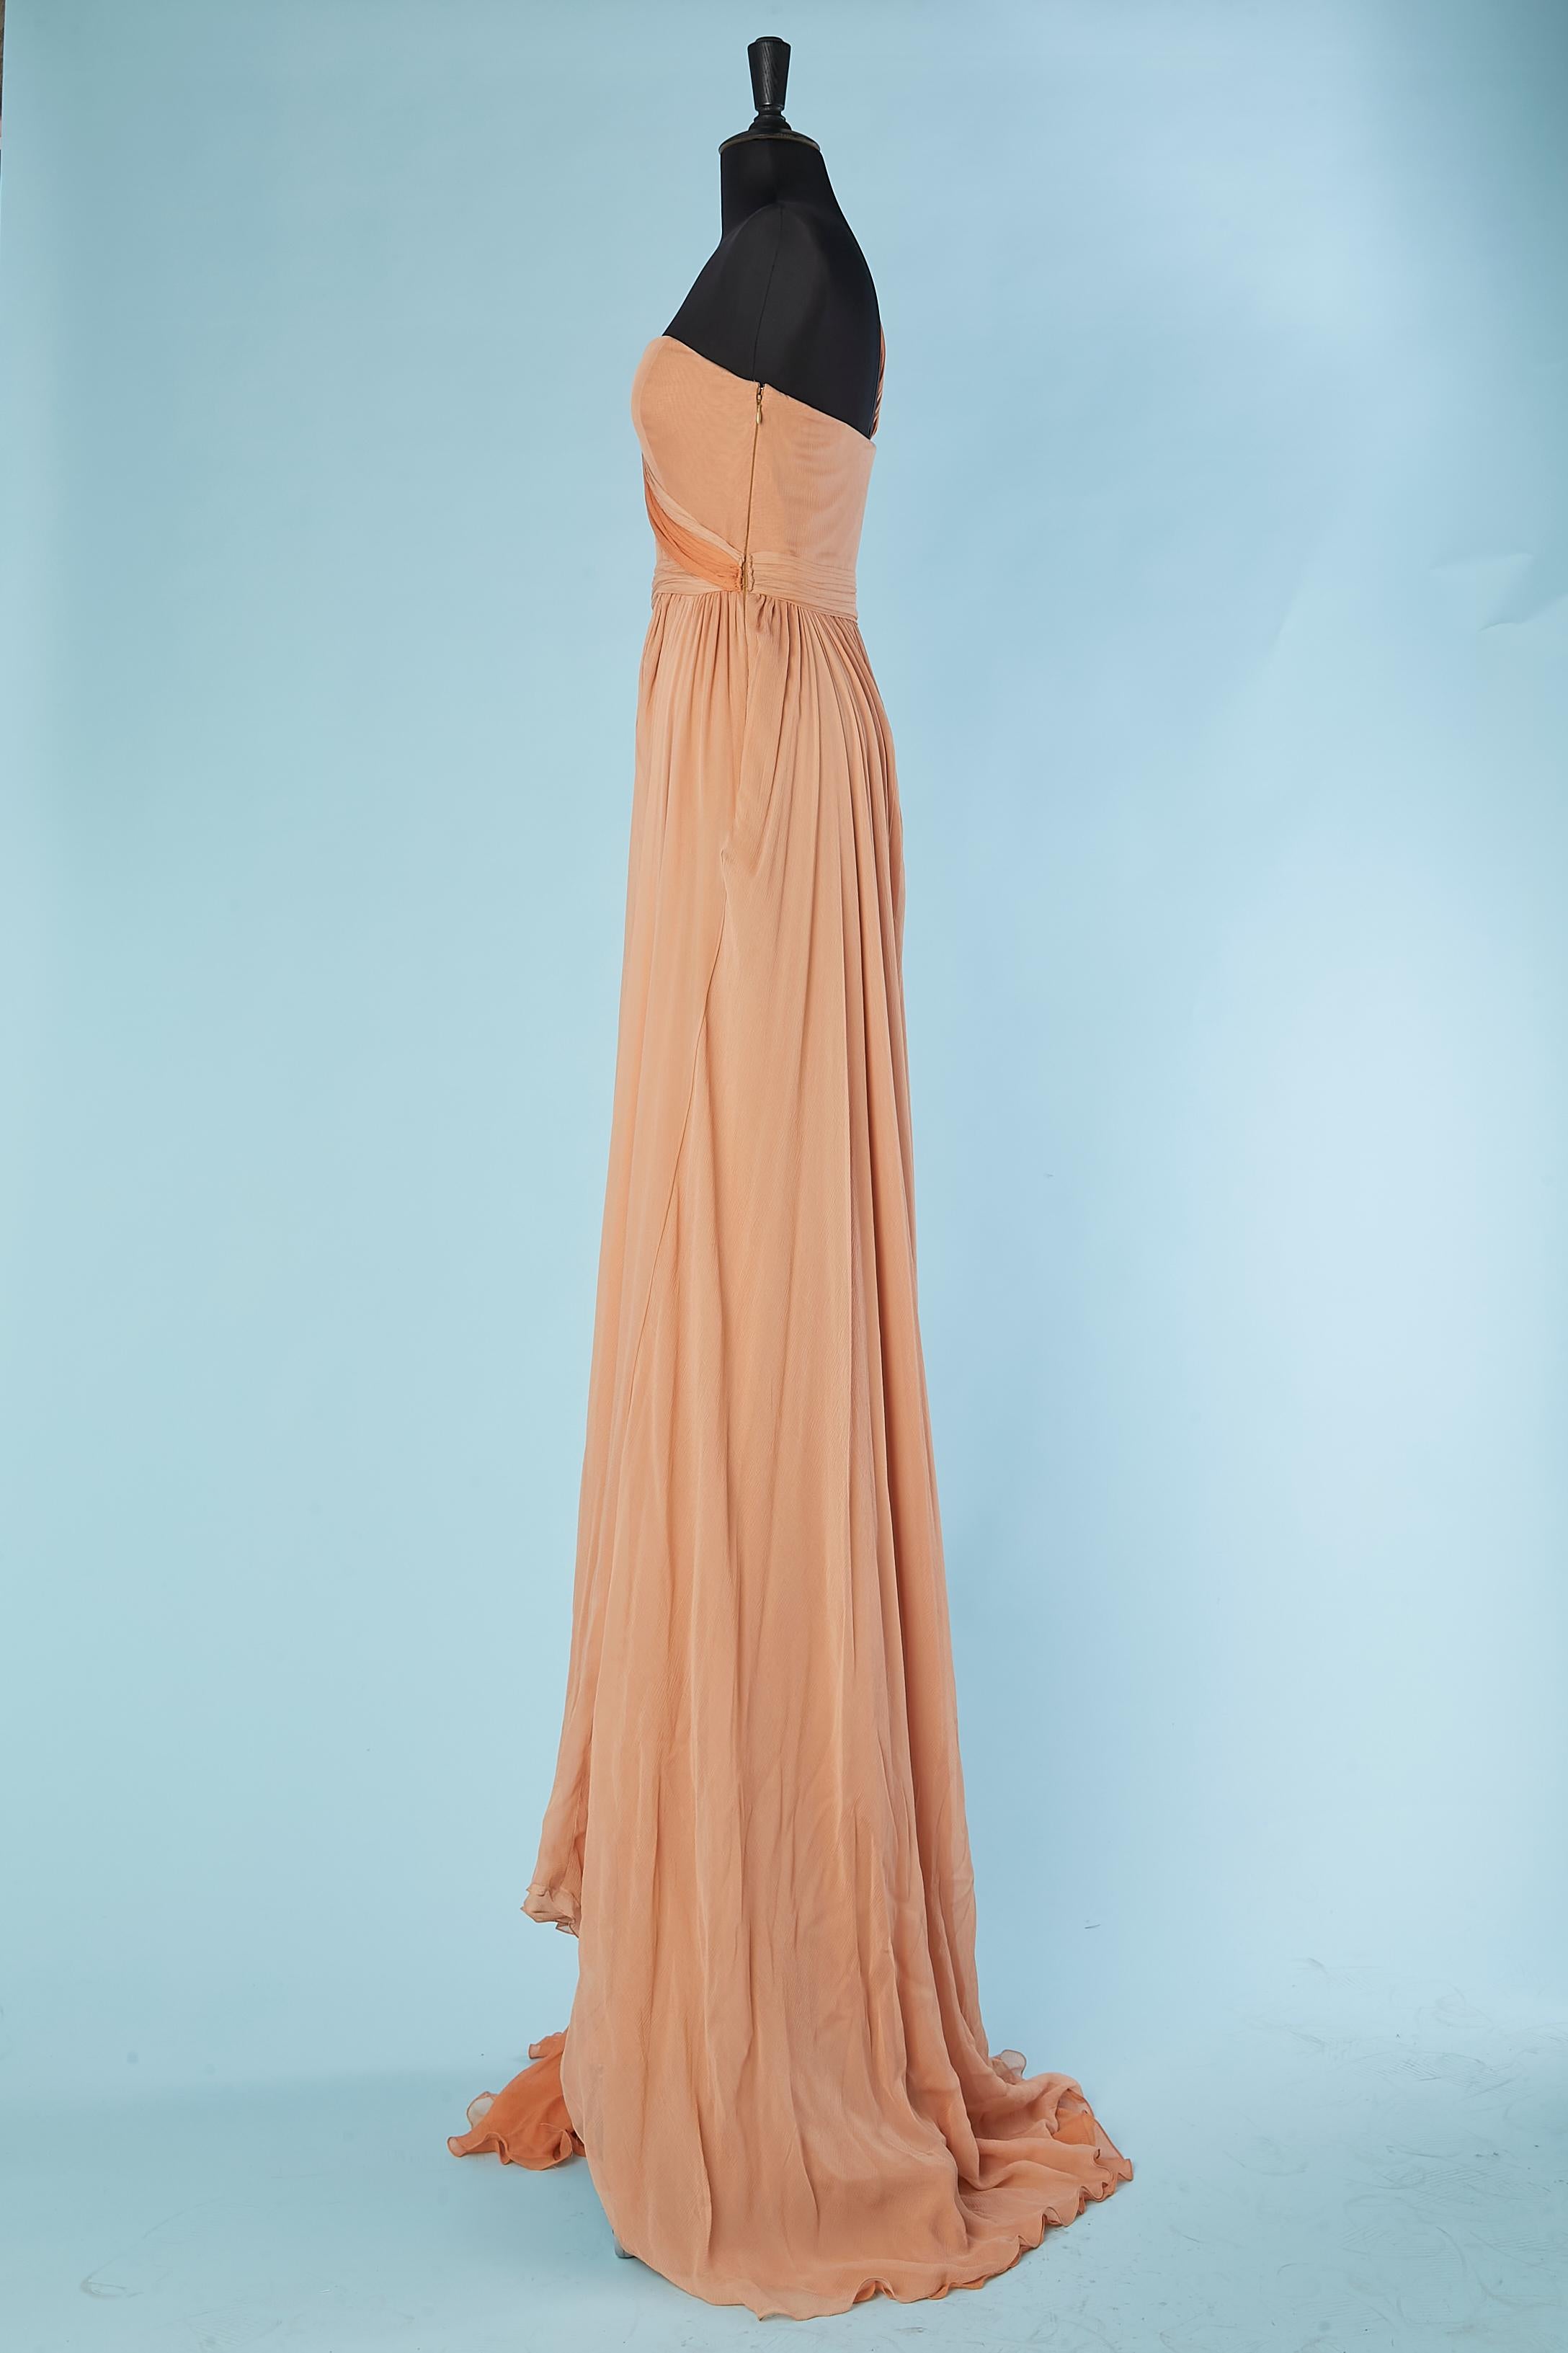 Women's Bicolore blush and orange bustier and asymmetrical evening dress Lorena Sarbu  For Sale